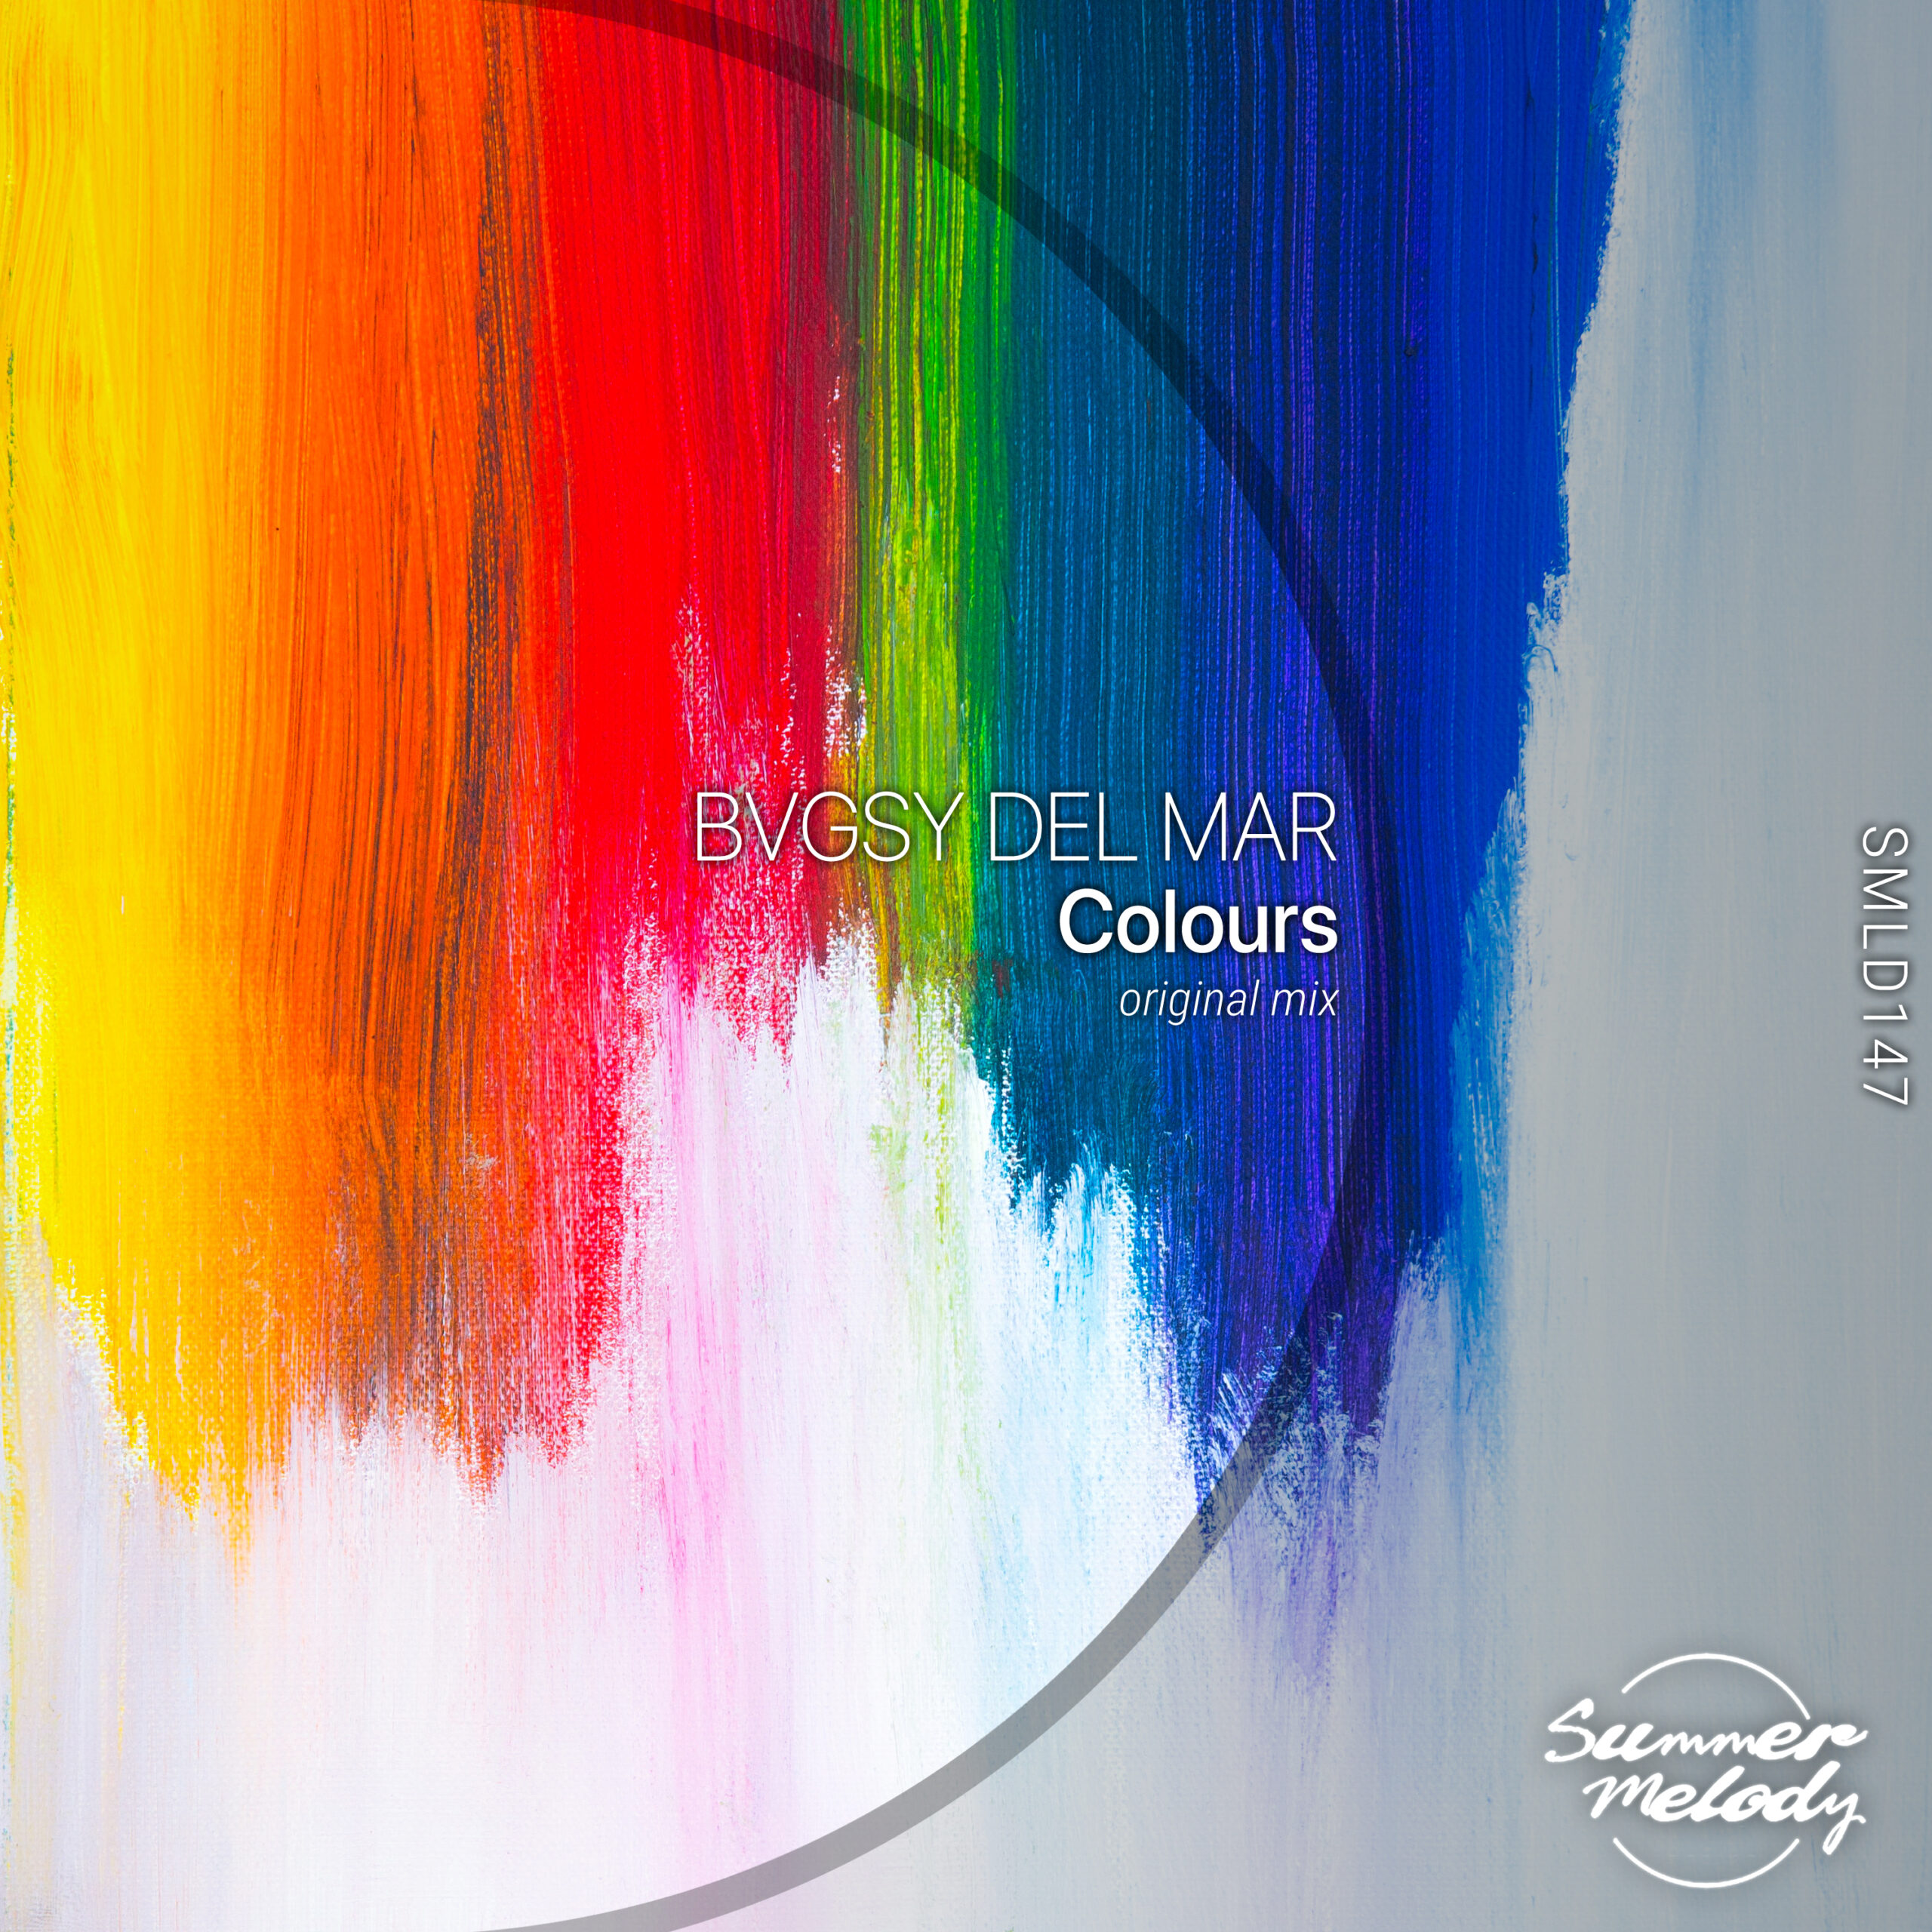 BVGSY DEL MAR presents Colours on Summer Melody Records